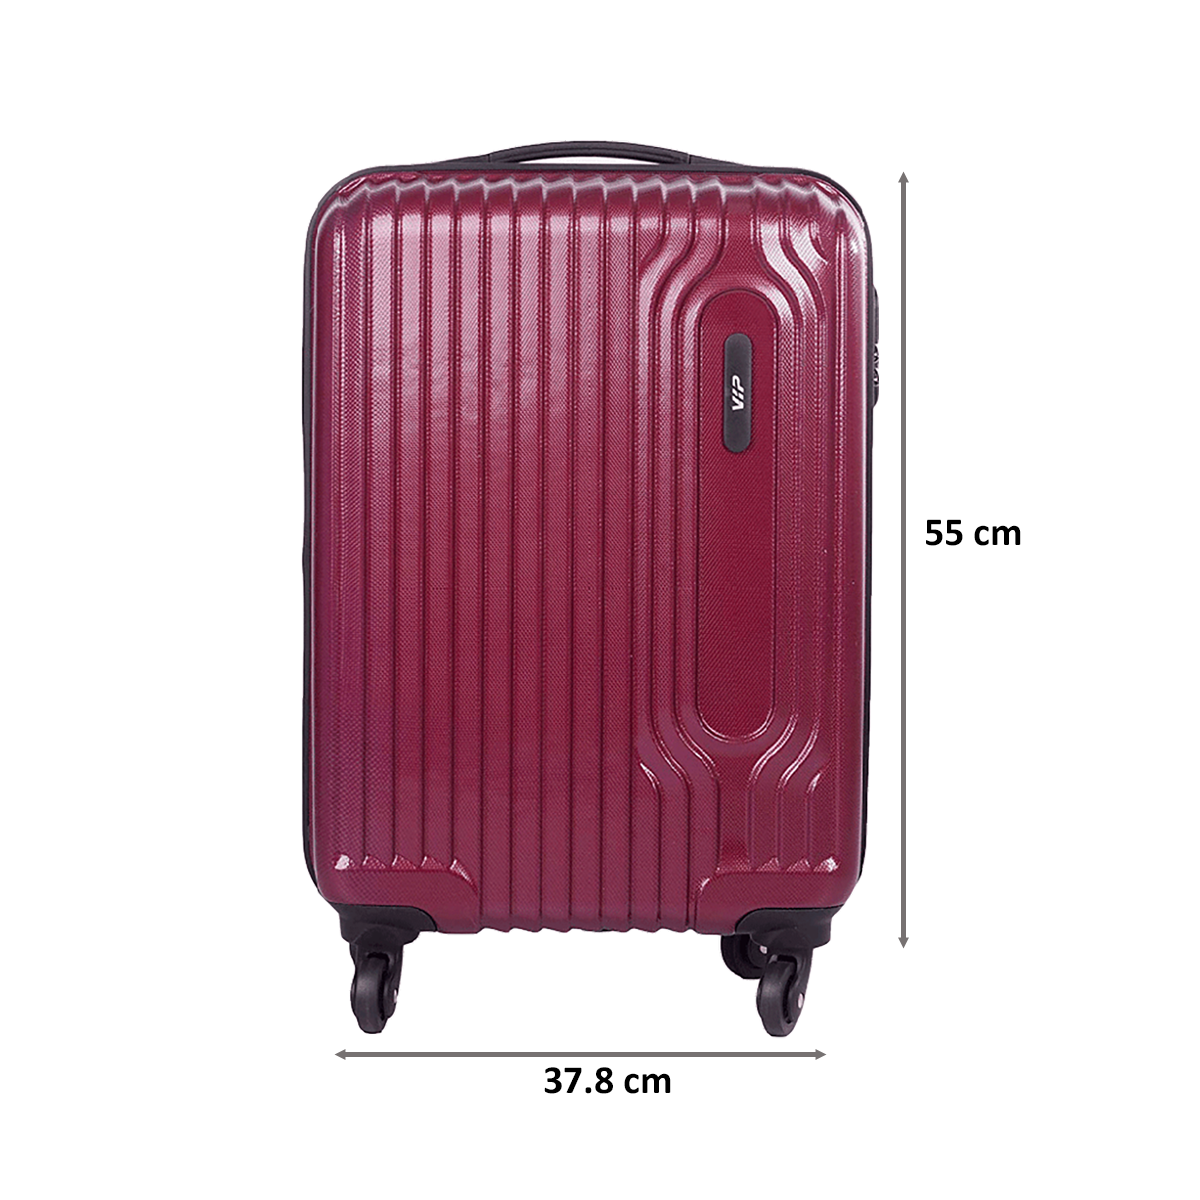 VIP Luggage And Travel Bag : Buy VIP Foxtrot-Avt Strolly Bag 80 360°  Celstial (L) Online | Nykaa Fashion